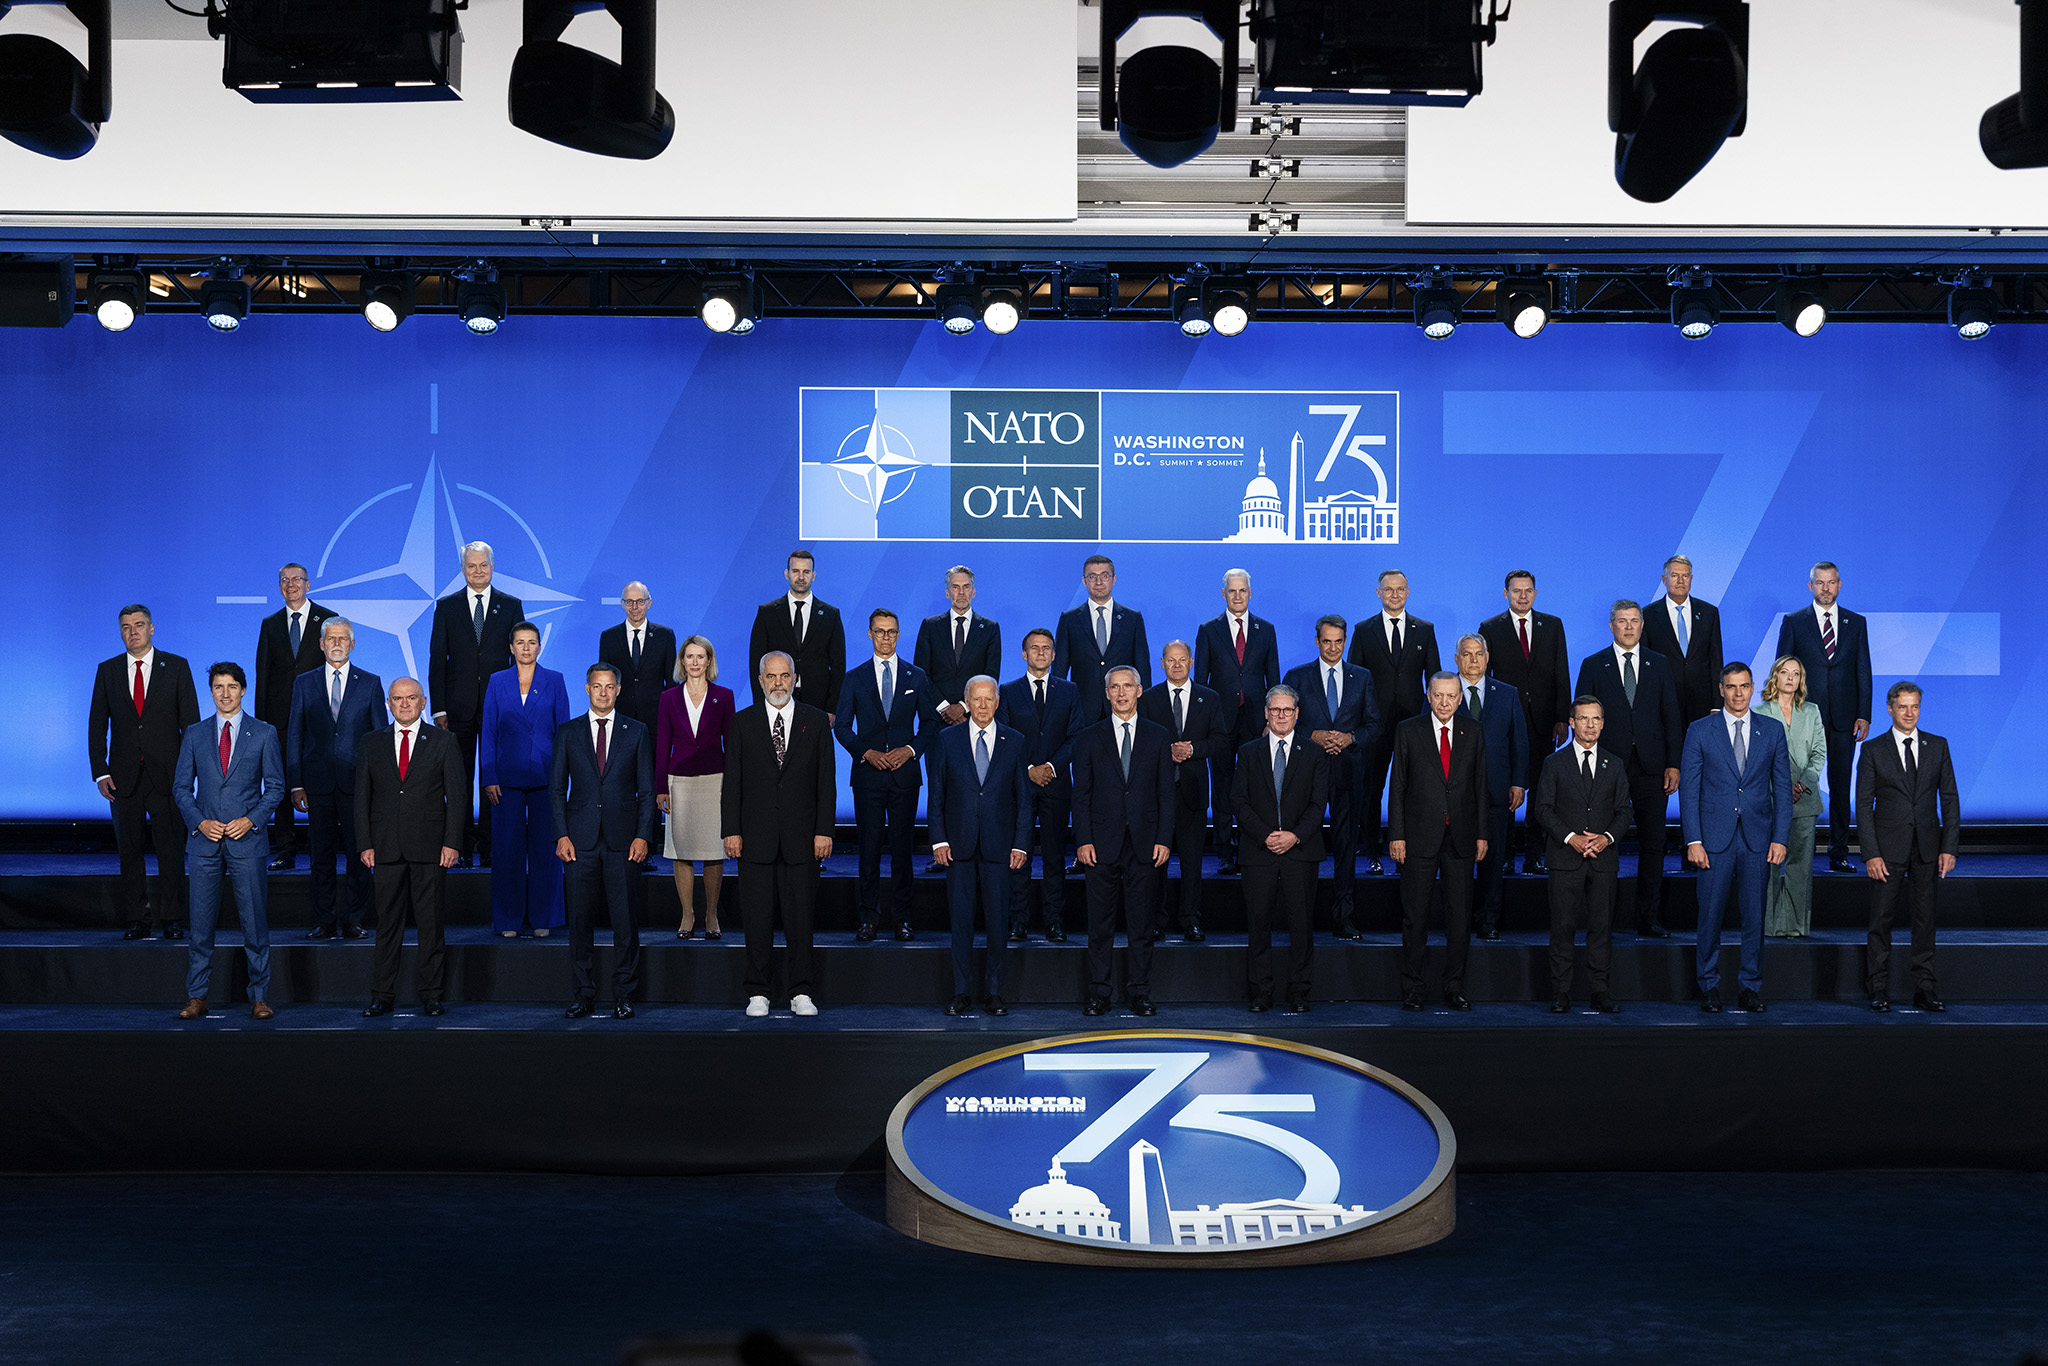 President Joe Biden takes part in a group photo with other leaders at the NATO Summit at the Walter E. Washington Convention Center in Washington, on Wednesday, July 10, 2024. (Eric Lee/The New York Times)